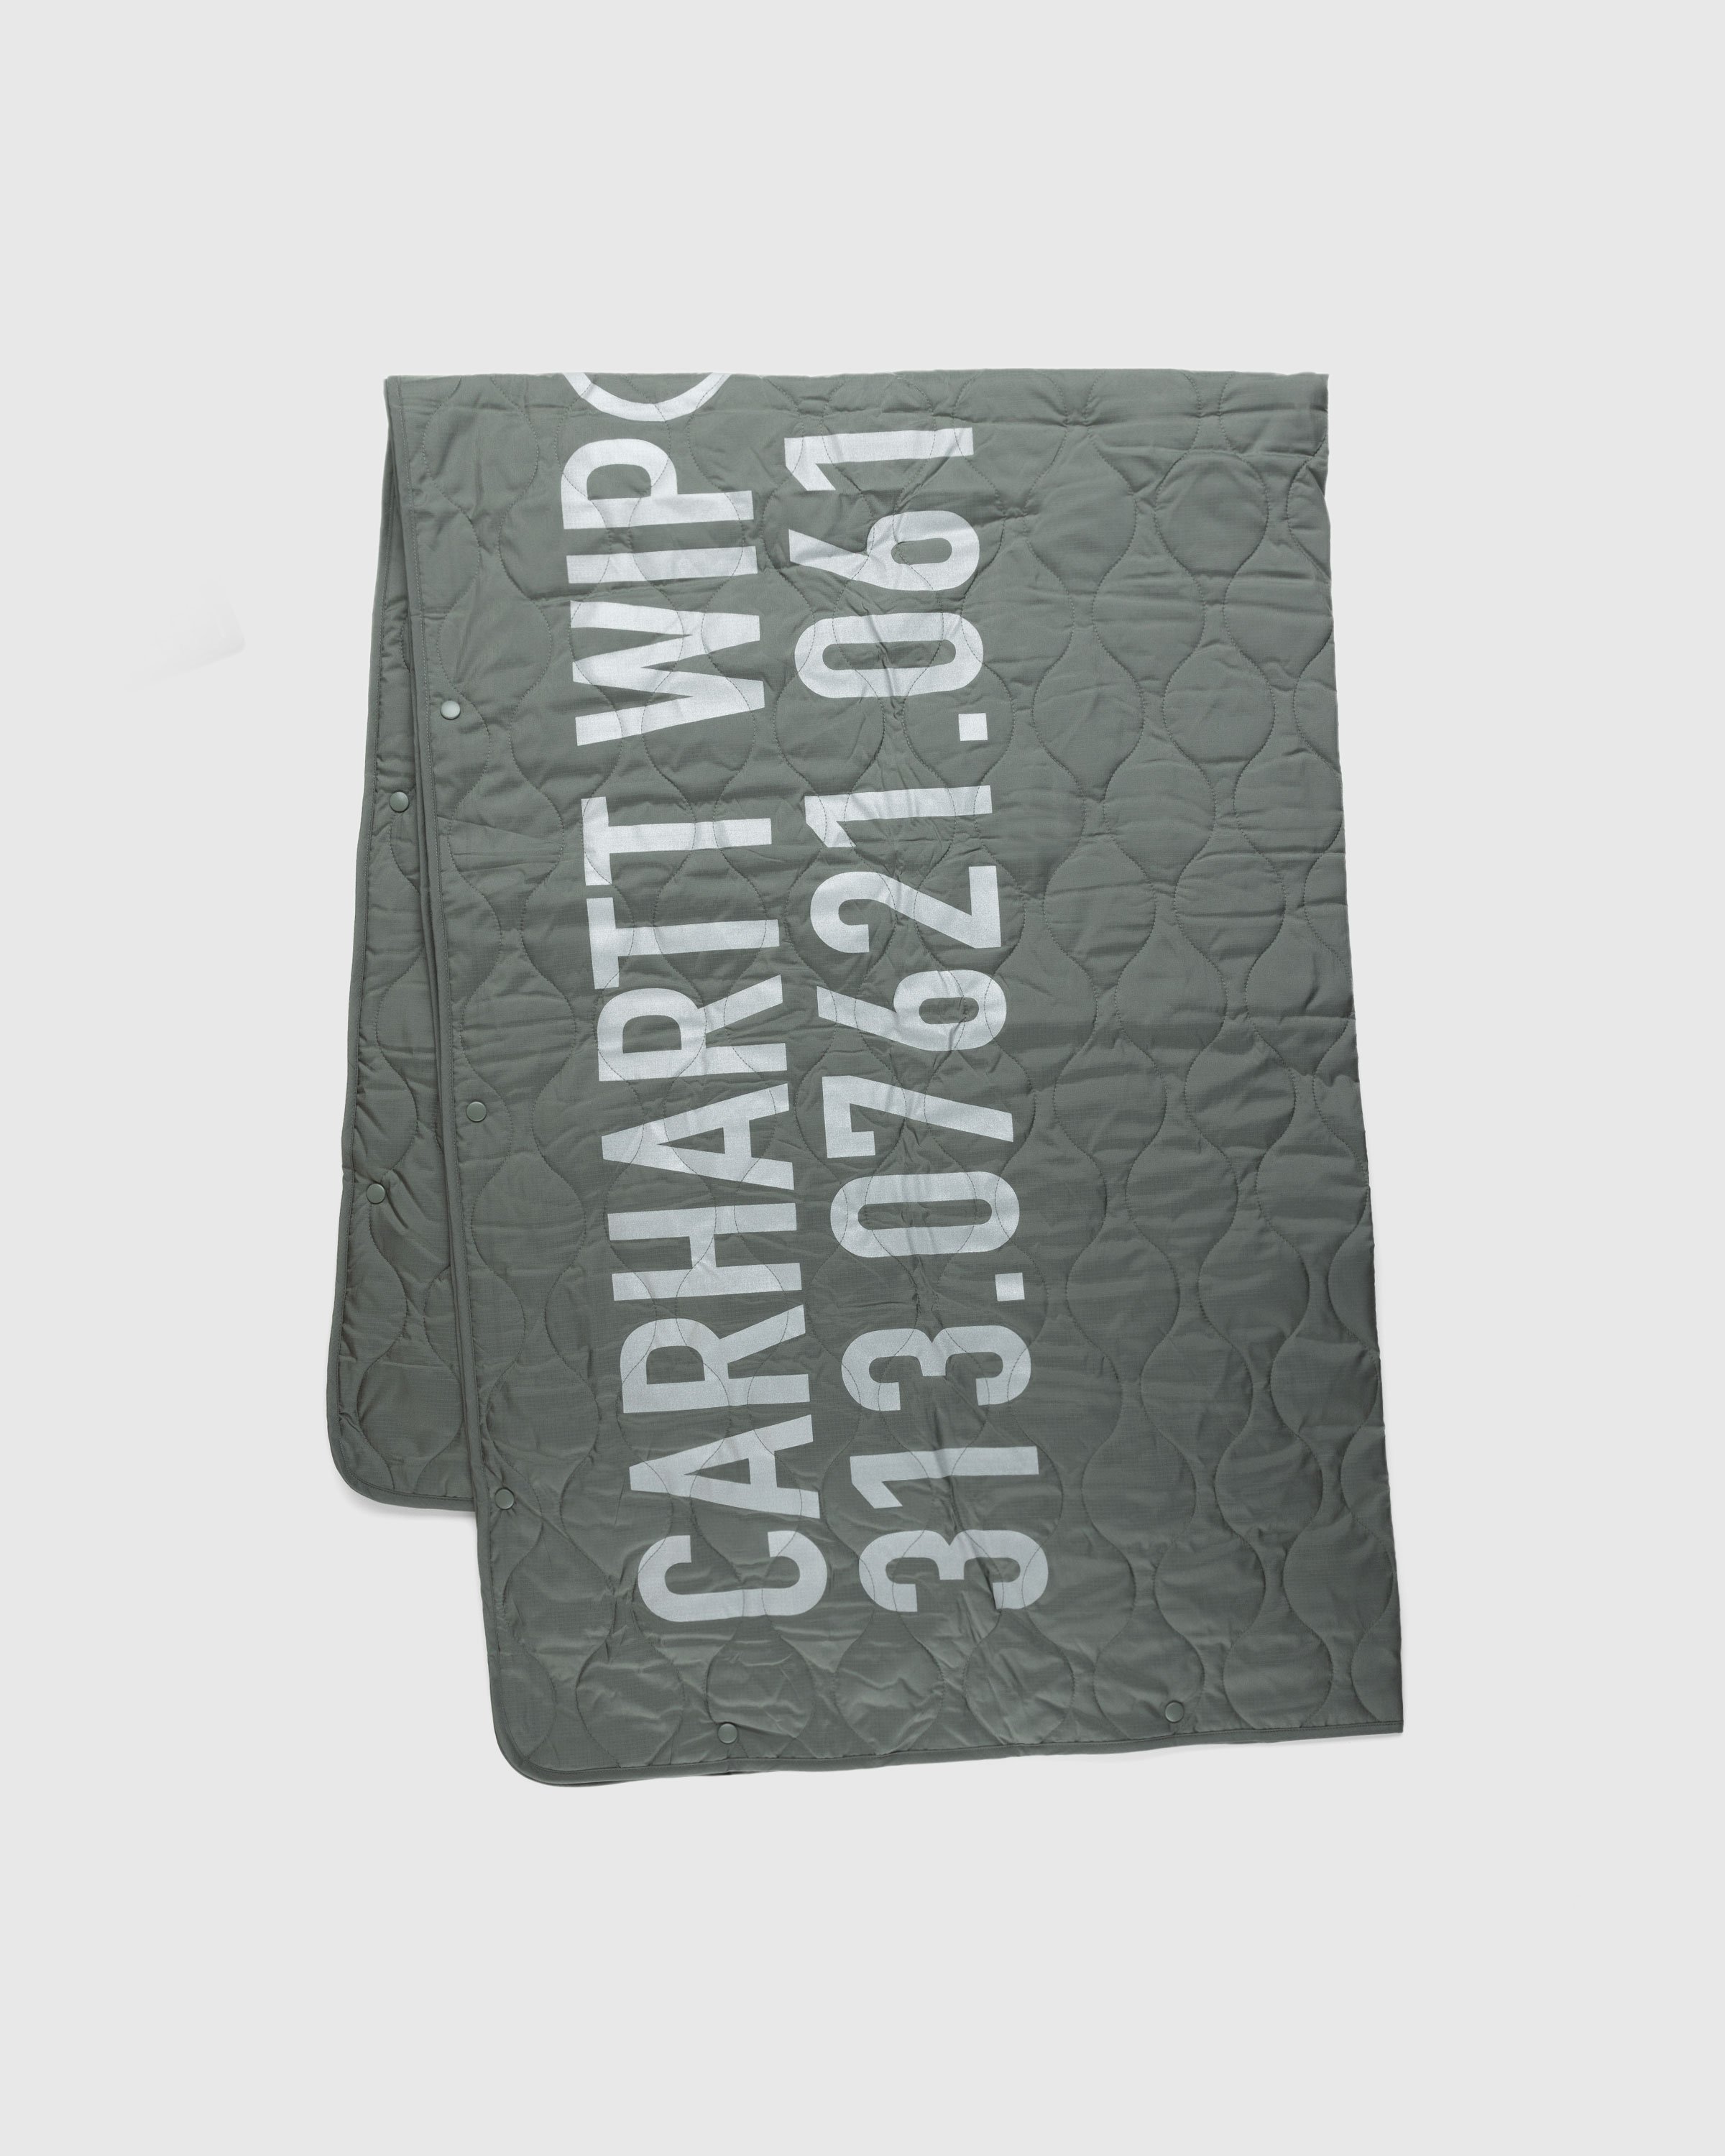 Carhartt WIP - Tour Quilted Blanket Green - Lifestyle - Green - Image 1